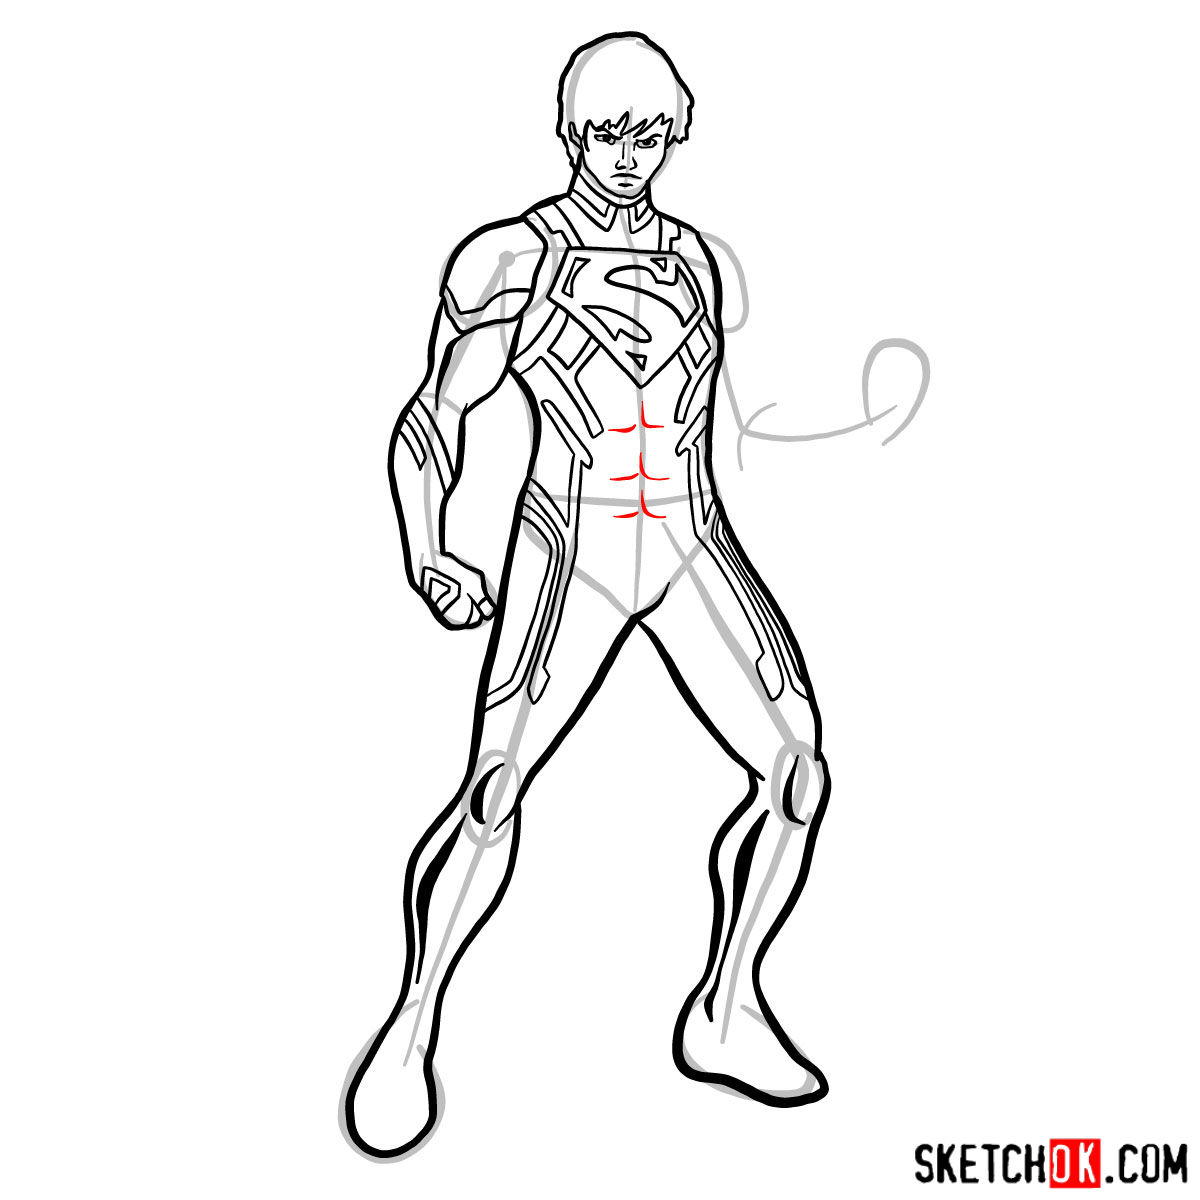 How to draw Superboy in a black suit - step 12